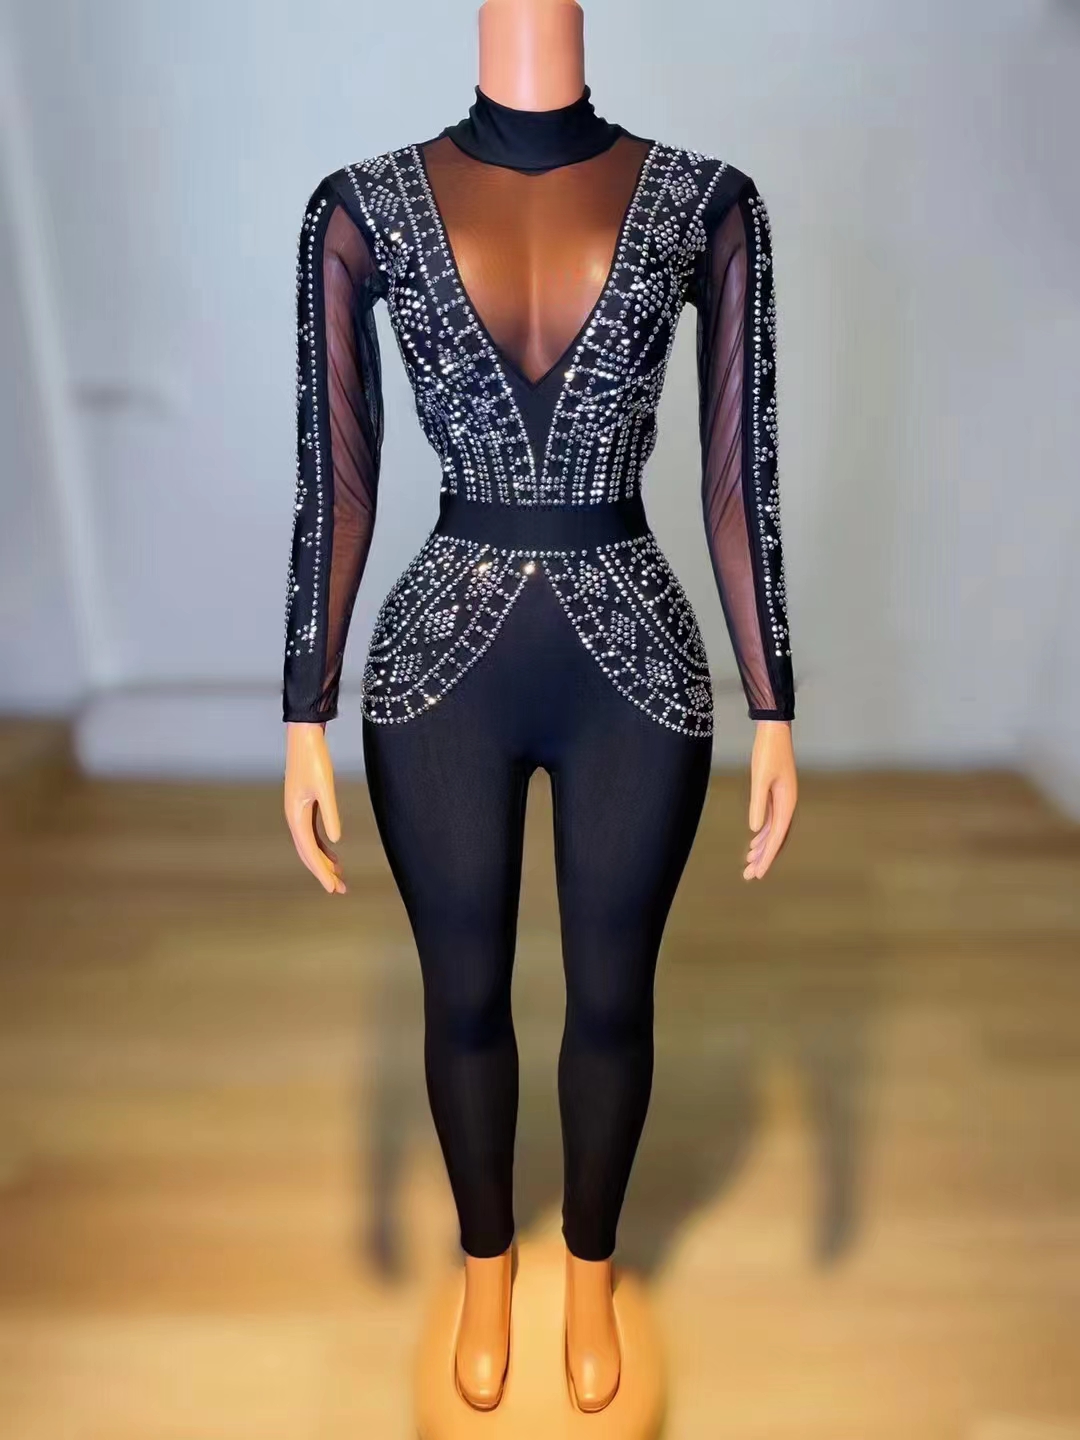 Silver Rhinestones Black Stage Wear Mesh Jumpsuit Sexy Performance Rompers Female Singer Birthday Dance Wear Stretch Outfit